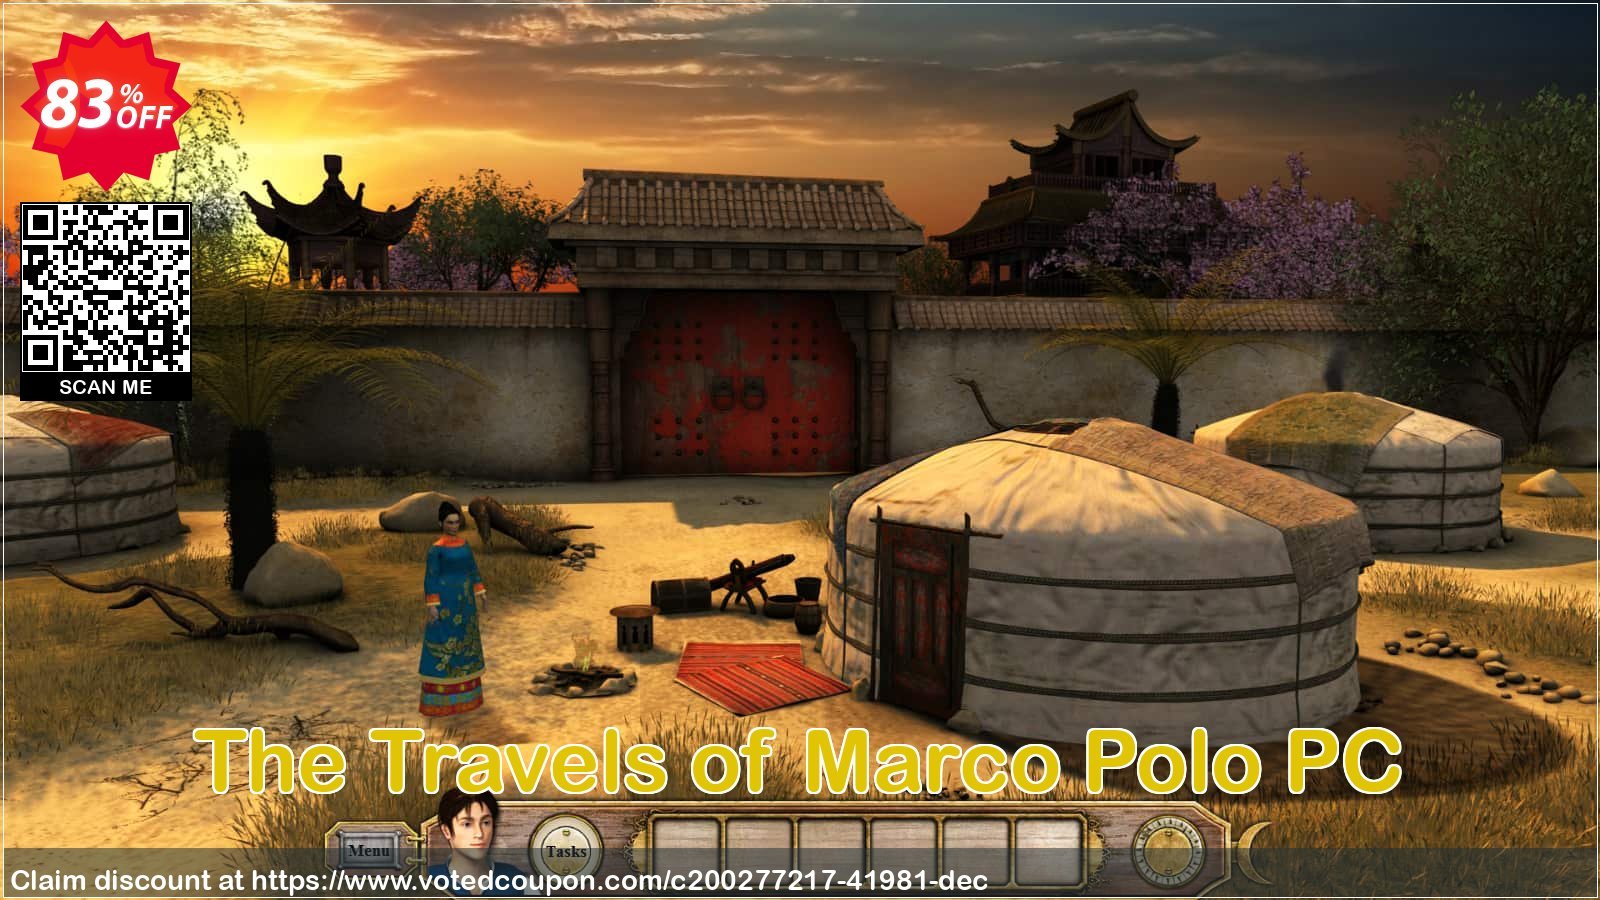 The Travels of Marco Polo PC Coupon Code May 2024, 83% OFF - VotedCoupon